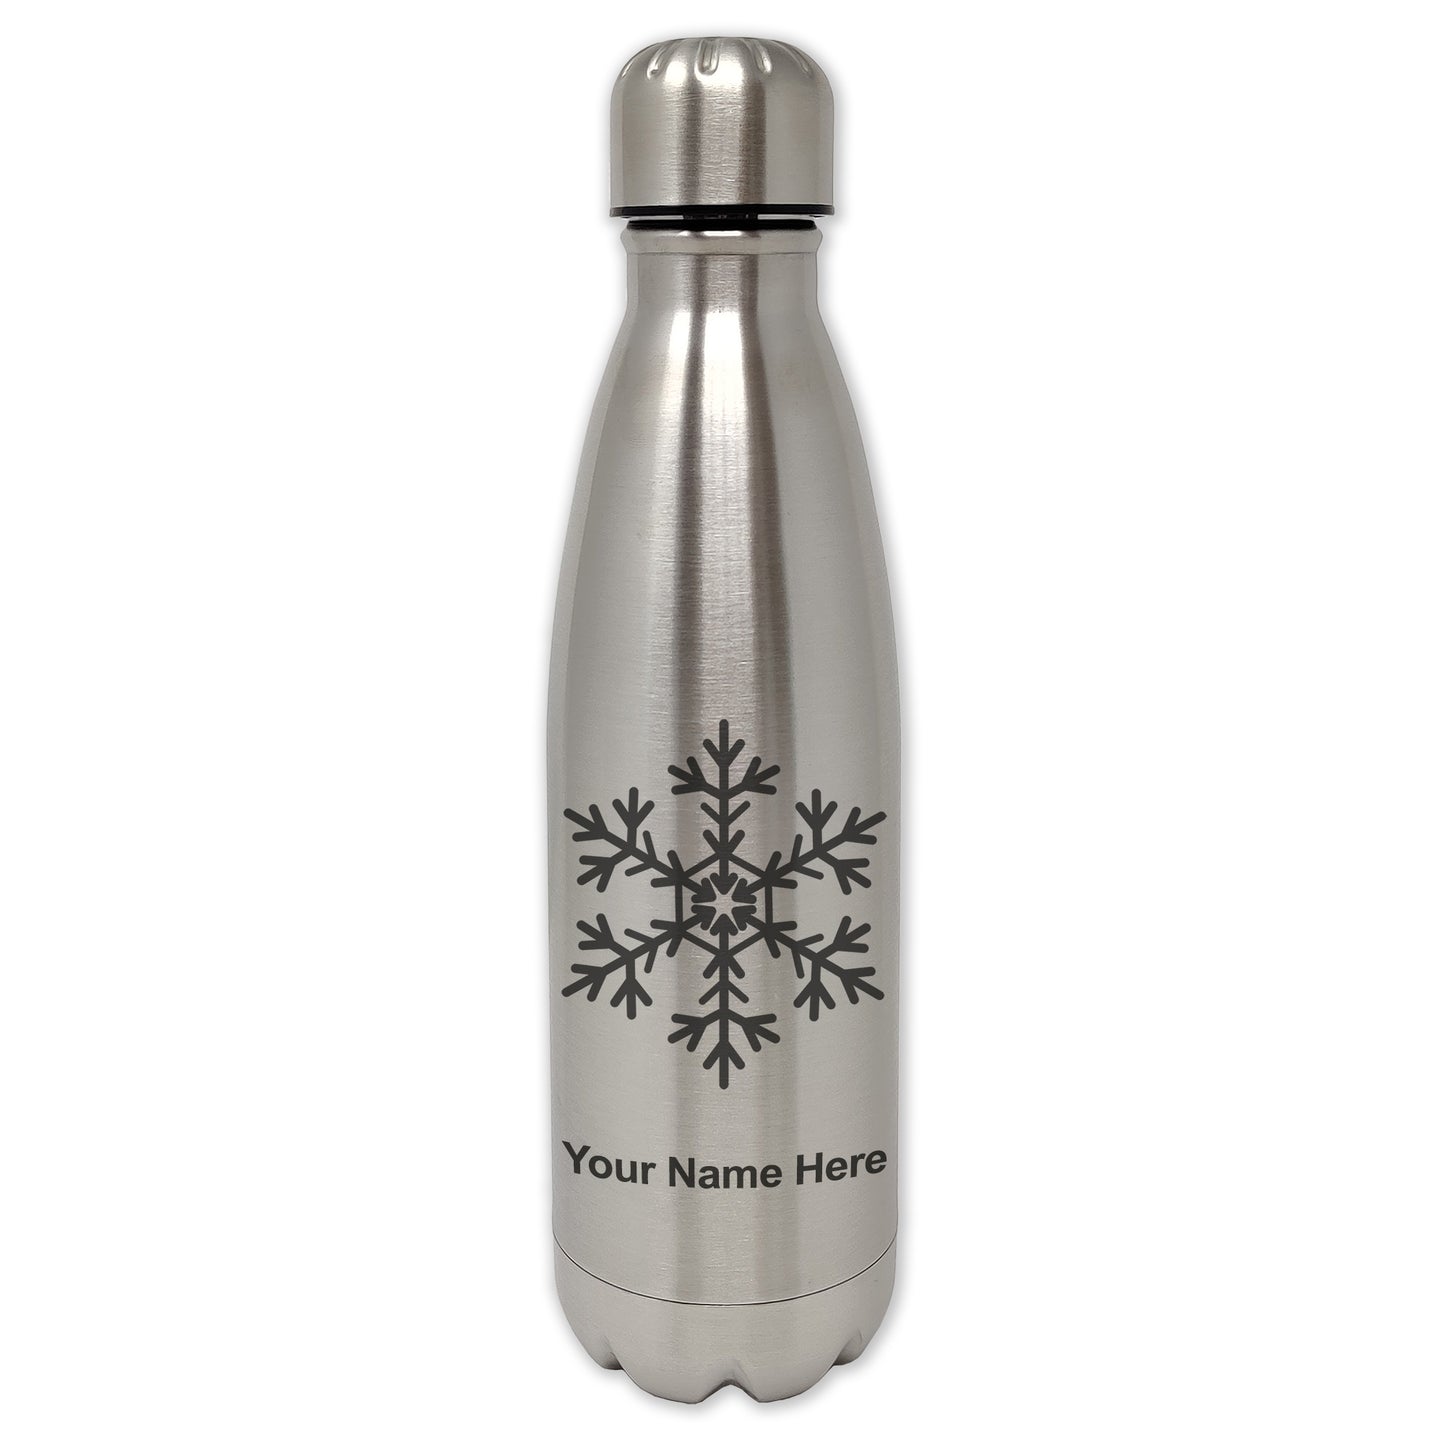 LaserGram Single Wall Water Bottle, Snowflake, Personalized Engraving Included